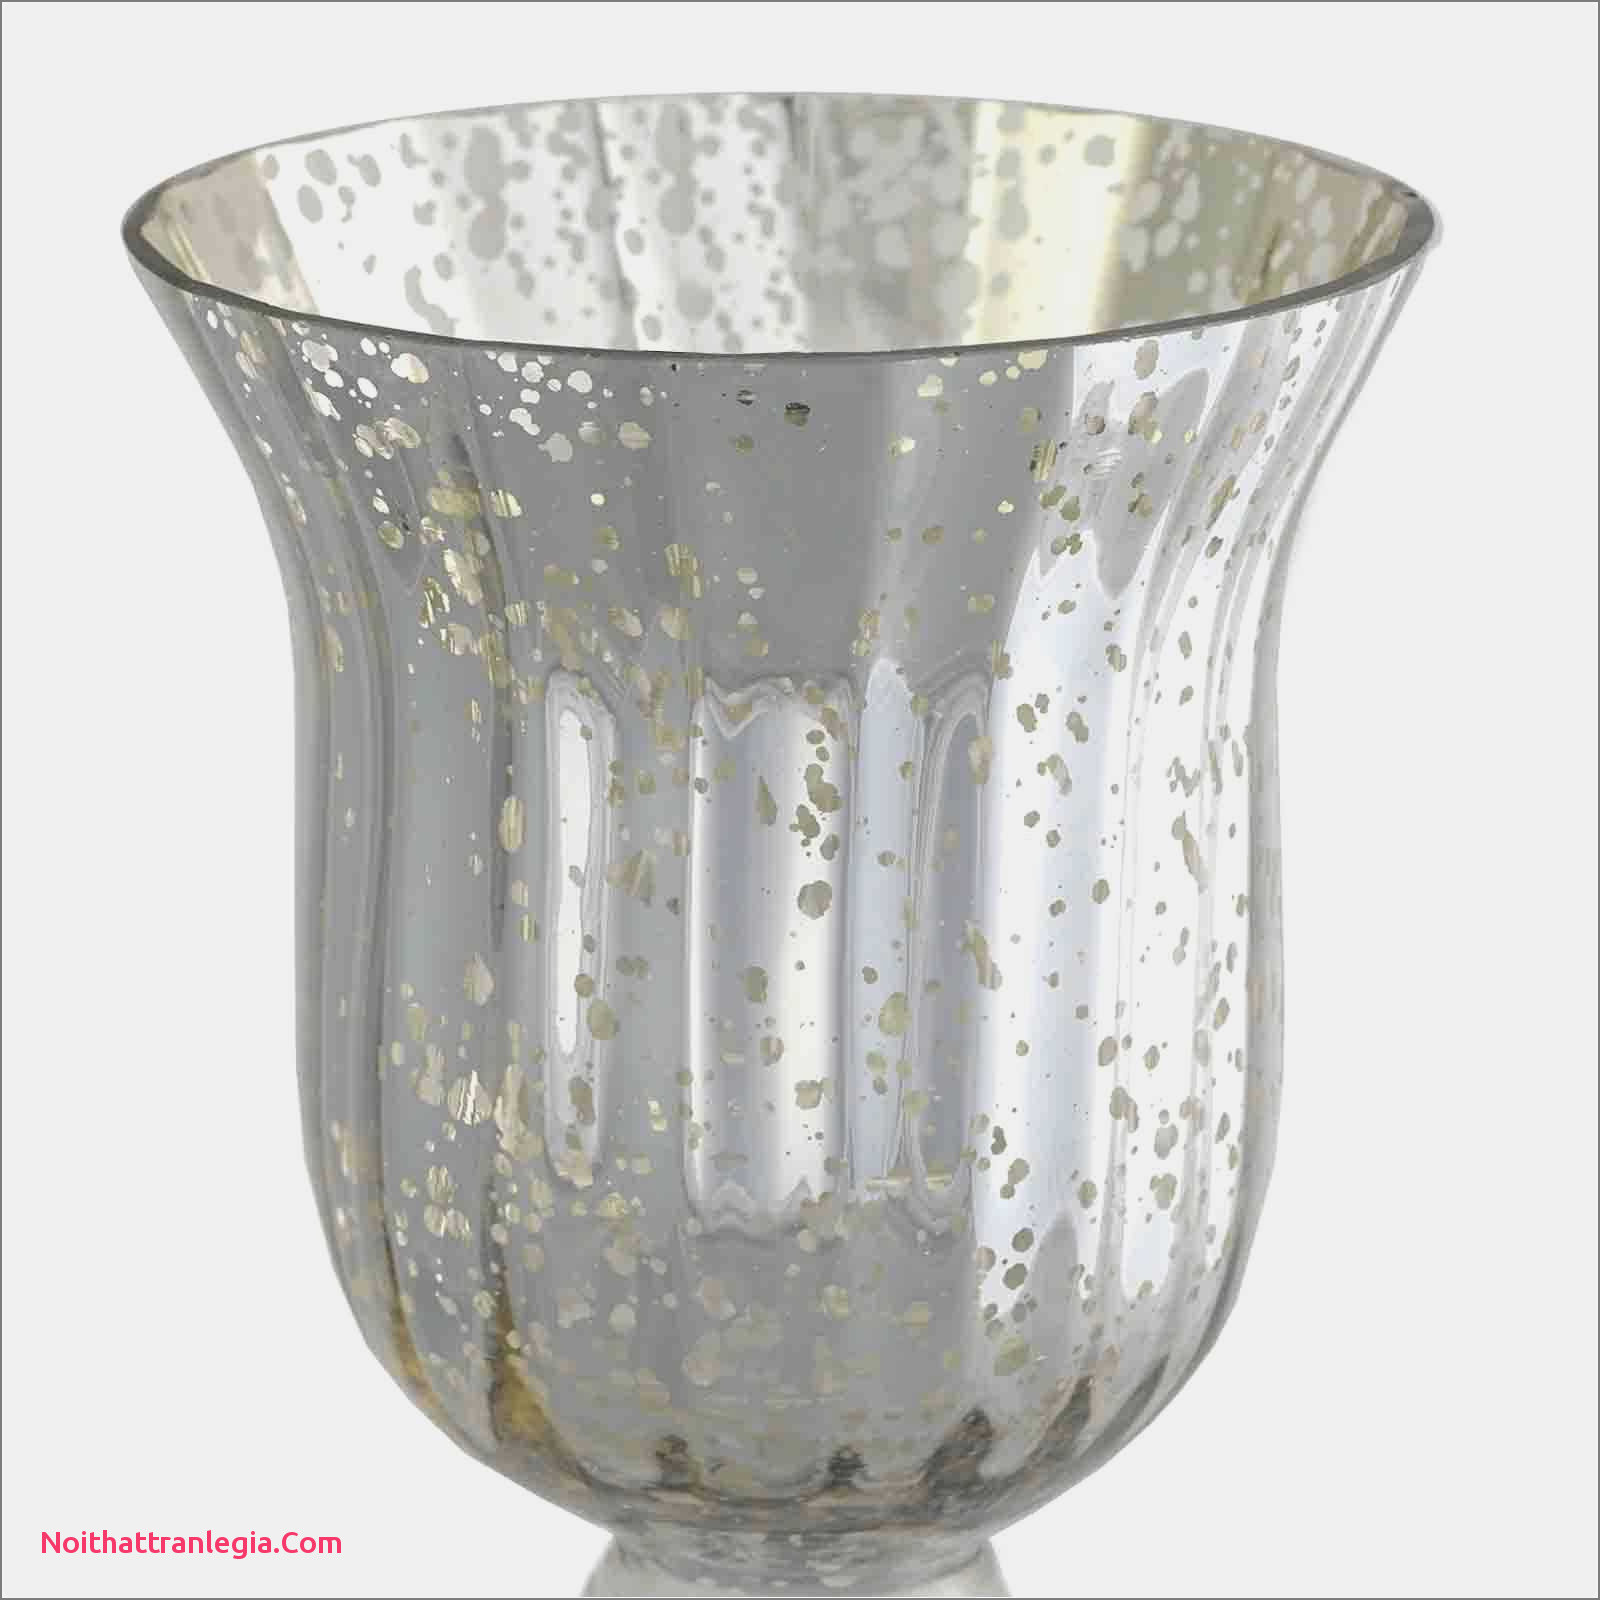 10 Perfect Square Glass Bud Vase 2024 free download square glass bud vase of 20 wedding vases noithattranlegia vases design within wedding guest gift ideas inspirational candles for wedding favors superb pe s5h vases candle vase i